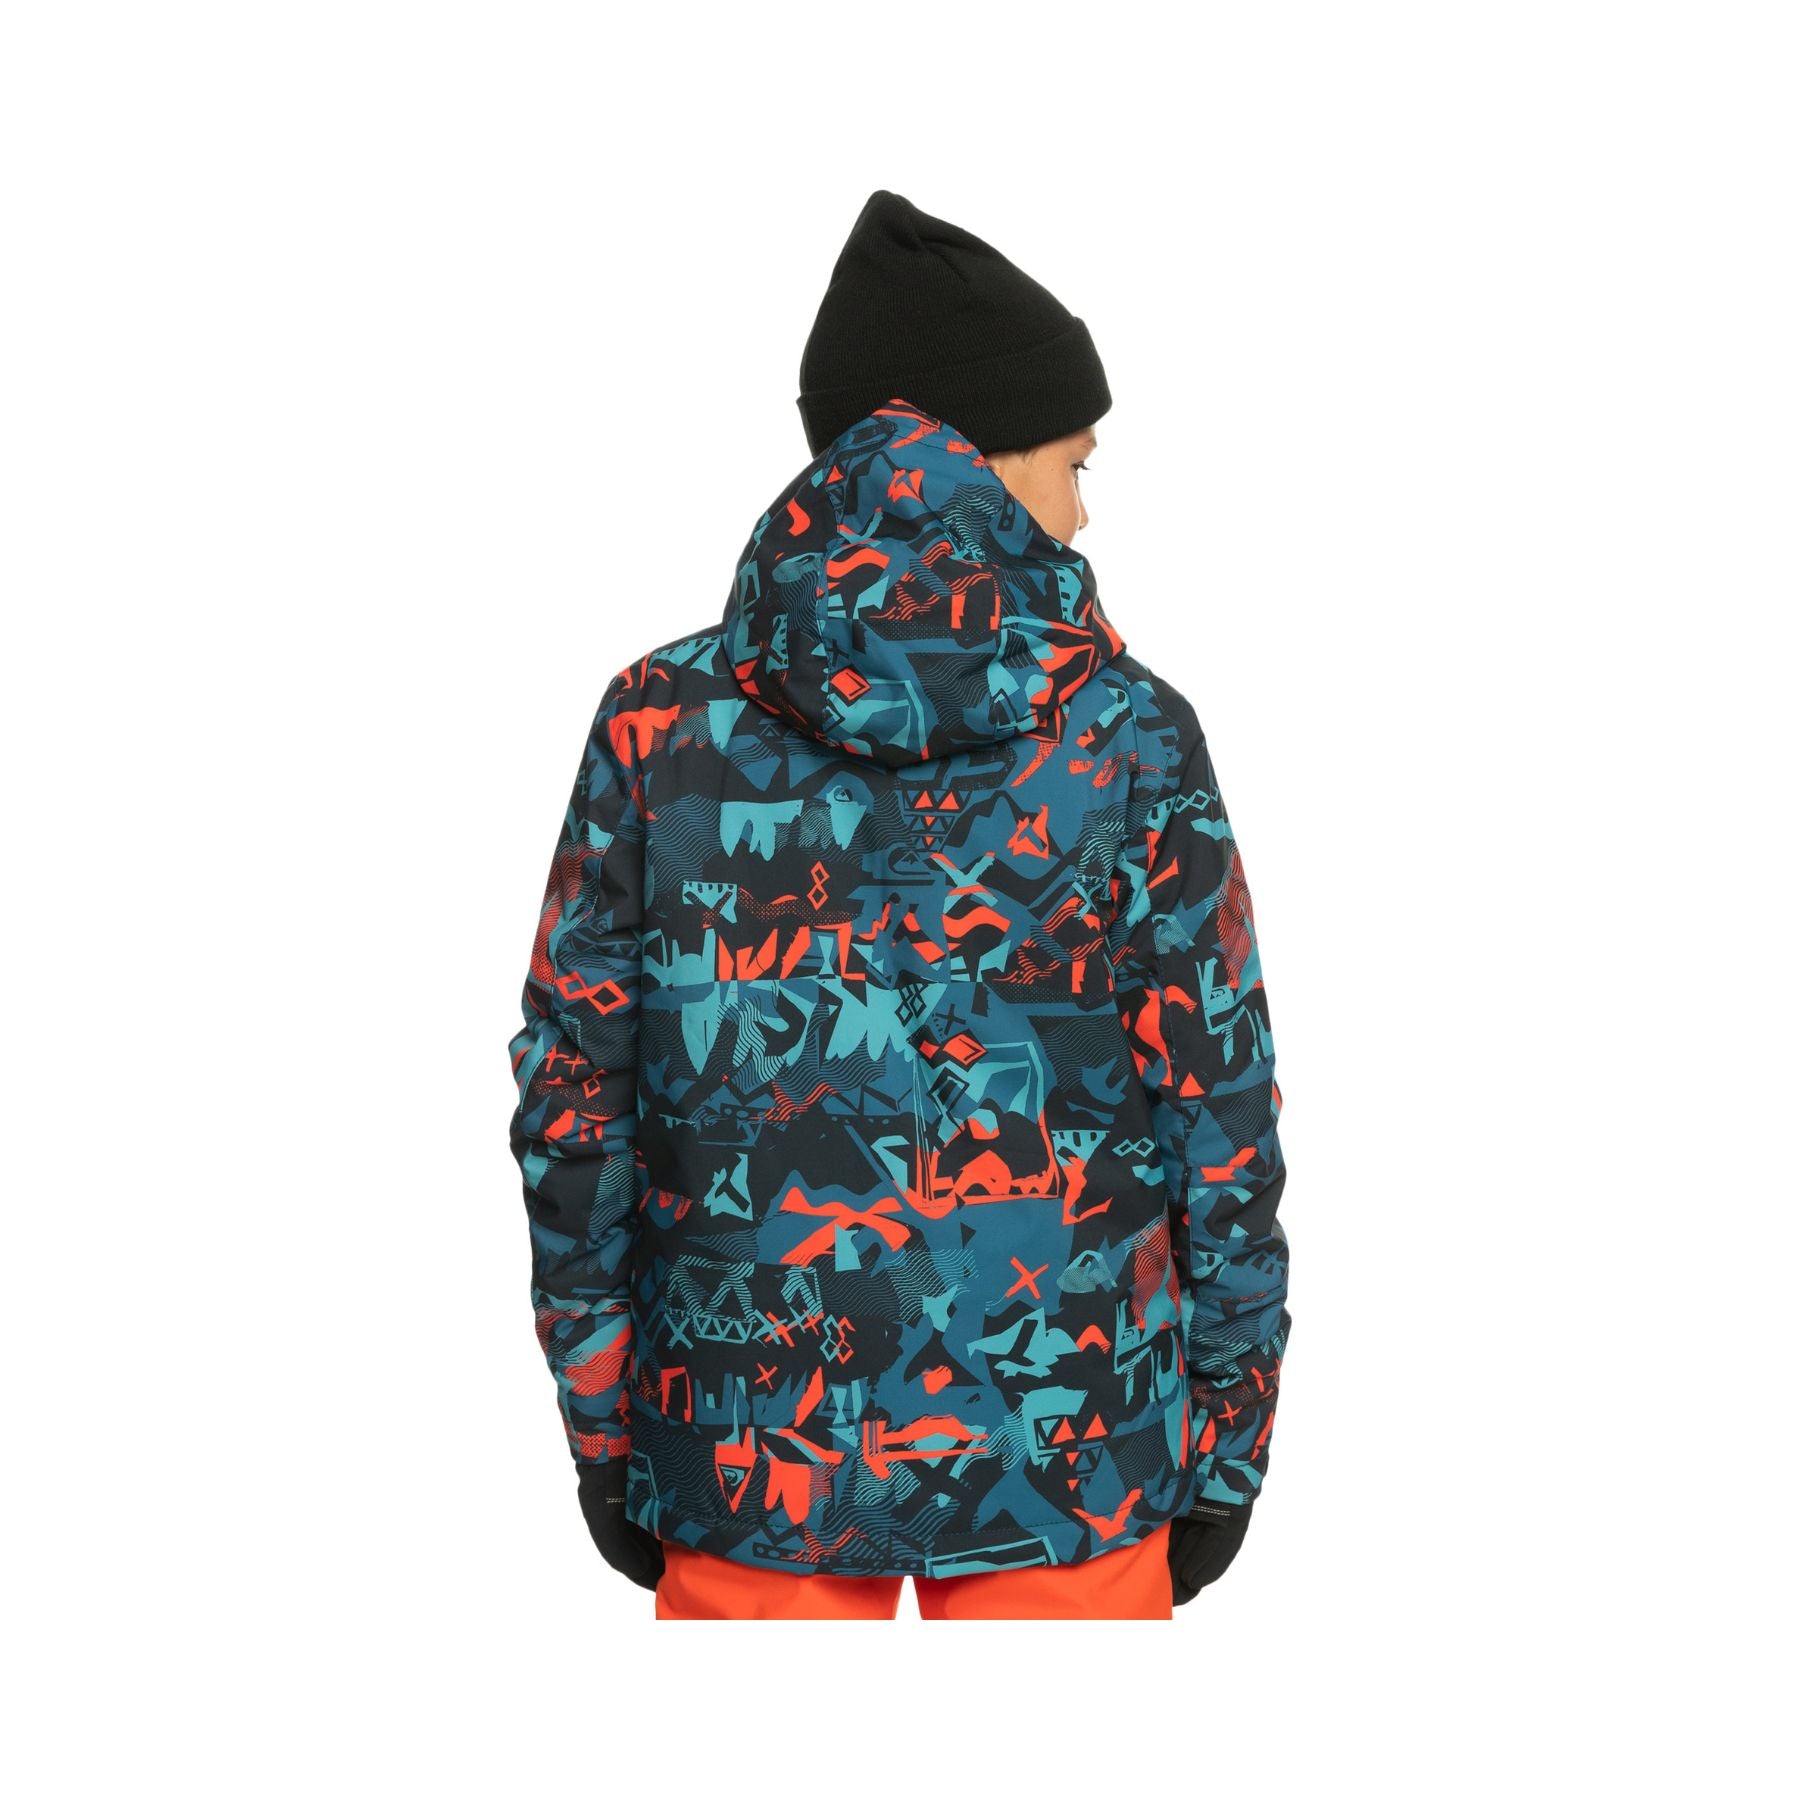 Quiksilver Mission Printed Youth Jacket in Building Mountains GR